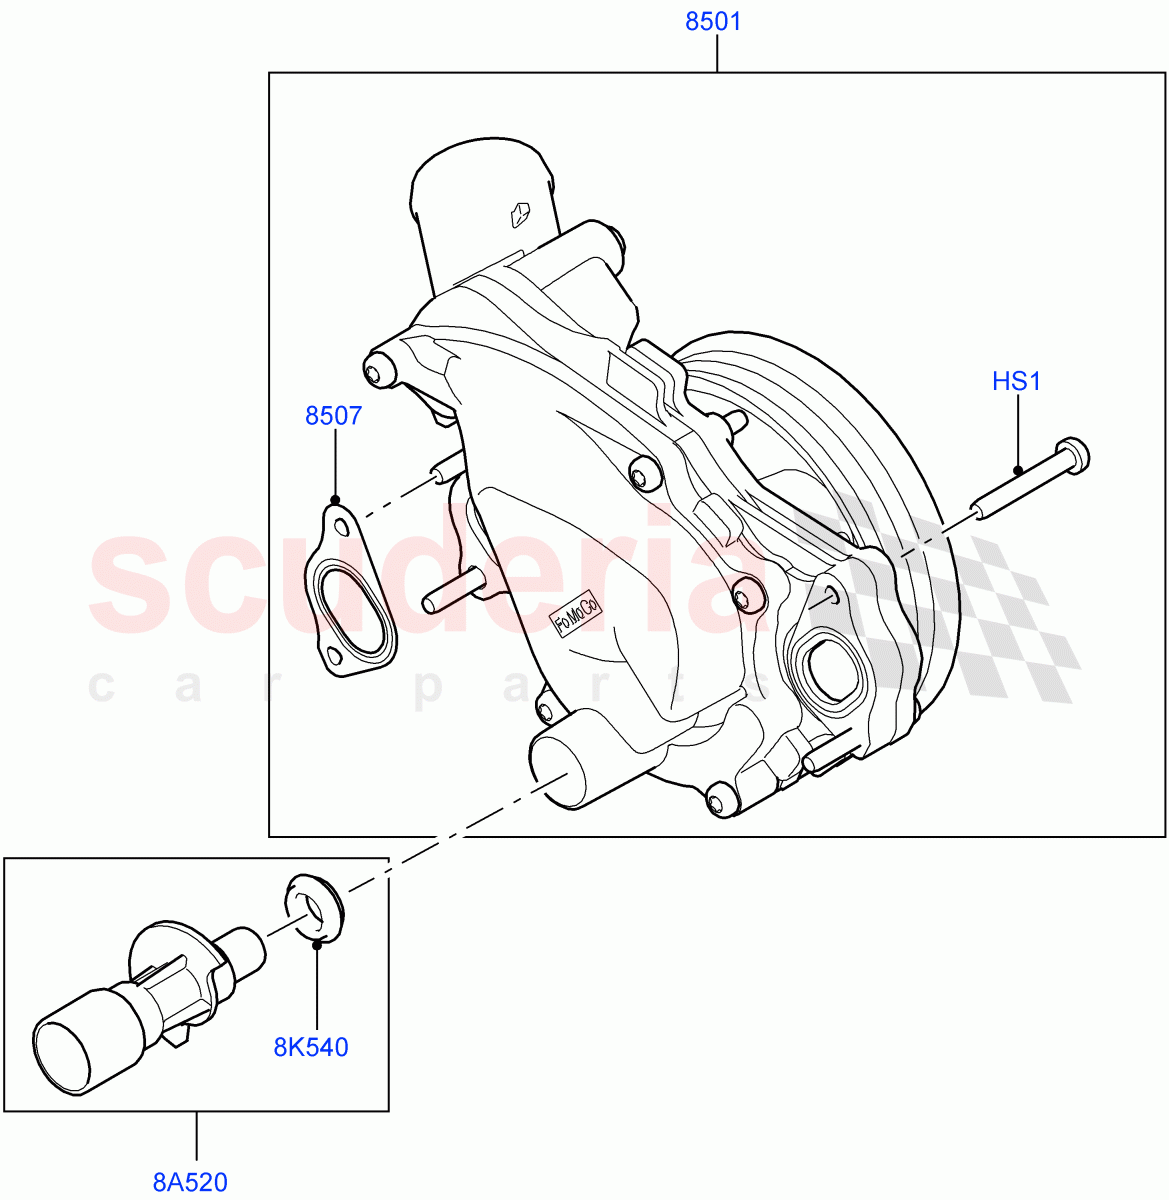 Water Pump(Solihull Plant Build, Main Unit)(3.0L DOHC GDI SC V6 PETROL)((V)FROMEA000001) of Land Rover Land Rover Discovery 4 (2010-2016) [3.0 DOHC GDI SC V6 Petrol]